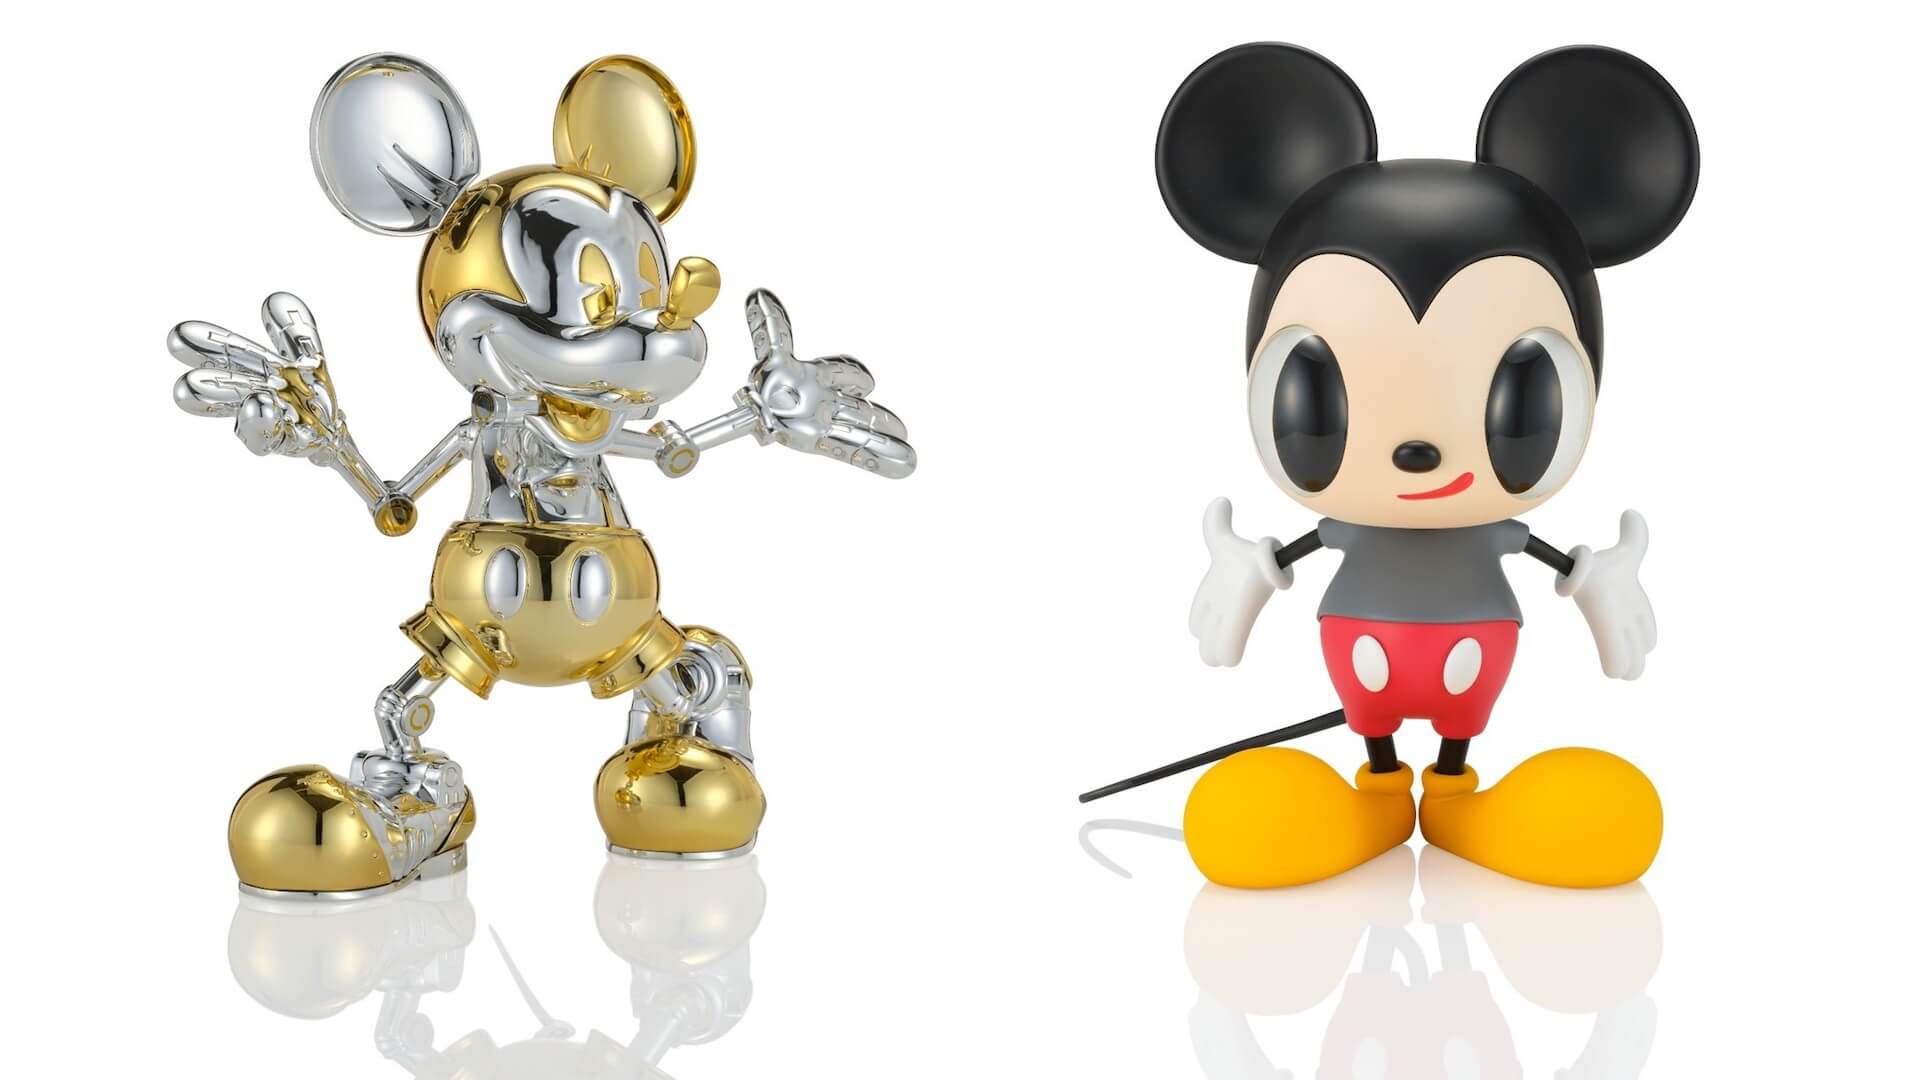 Mickey Mouse Now and Future 空山基 | www.myglobaltax.com